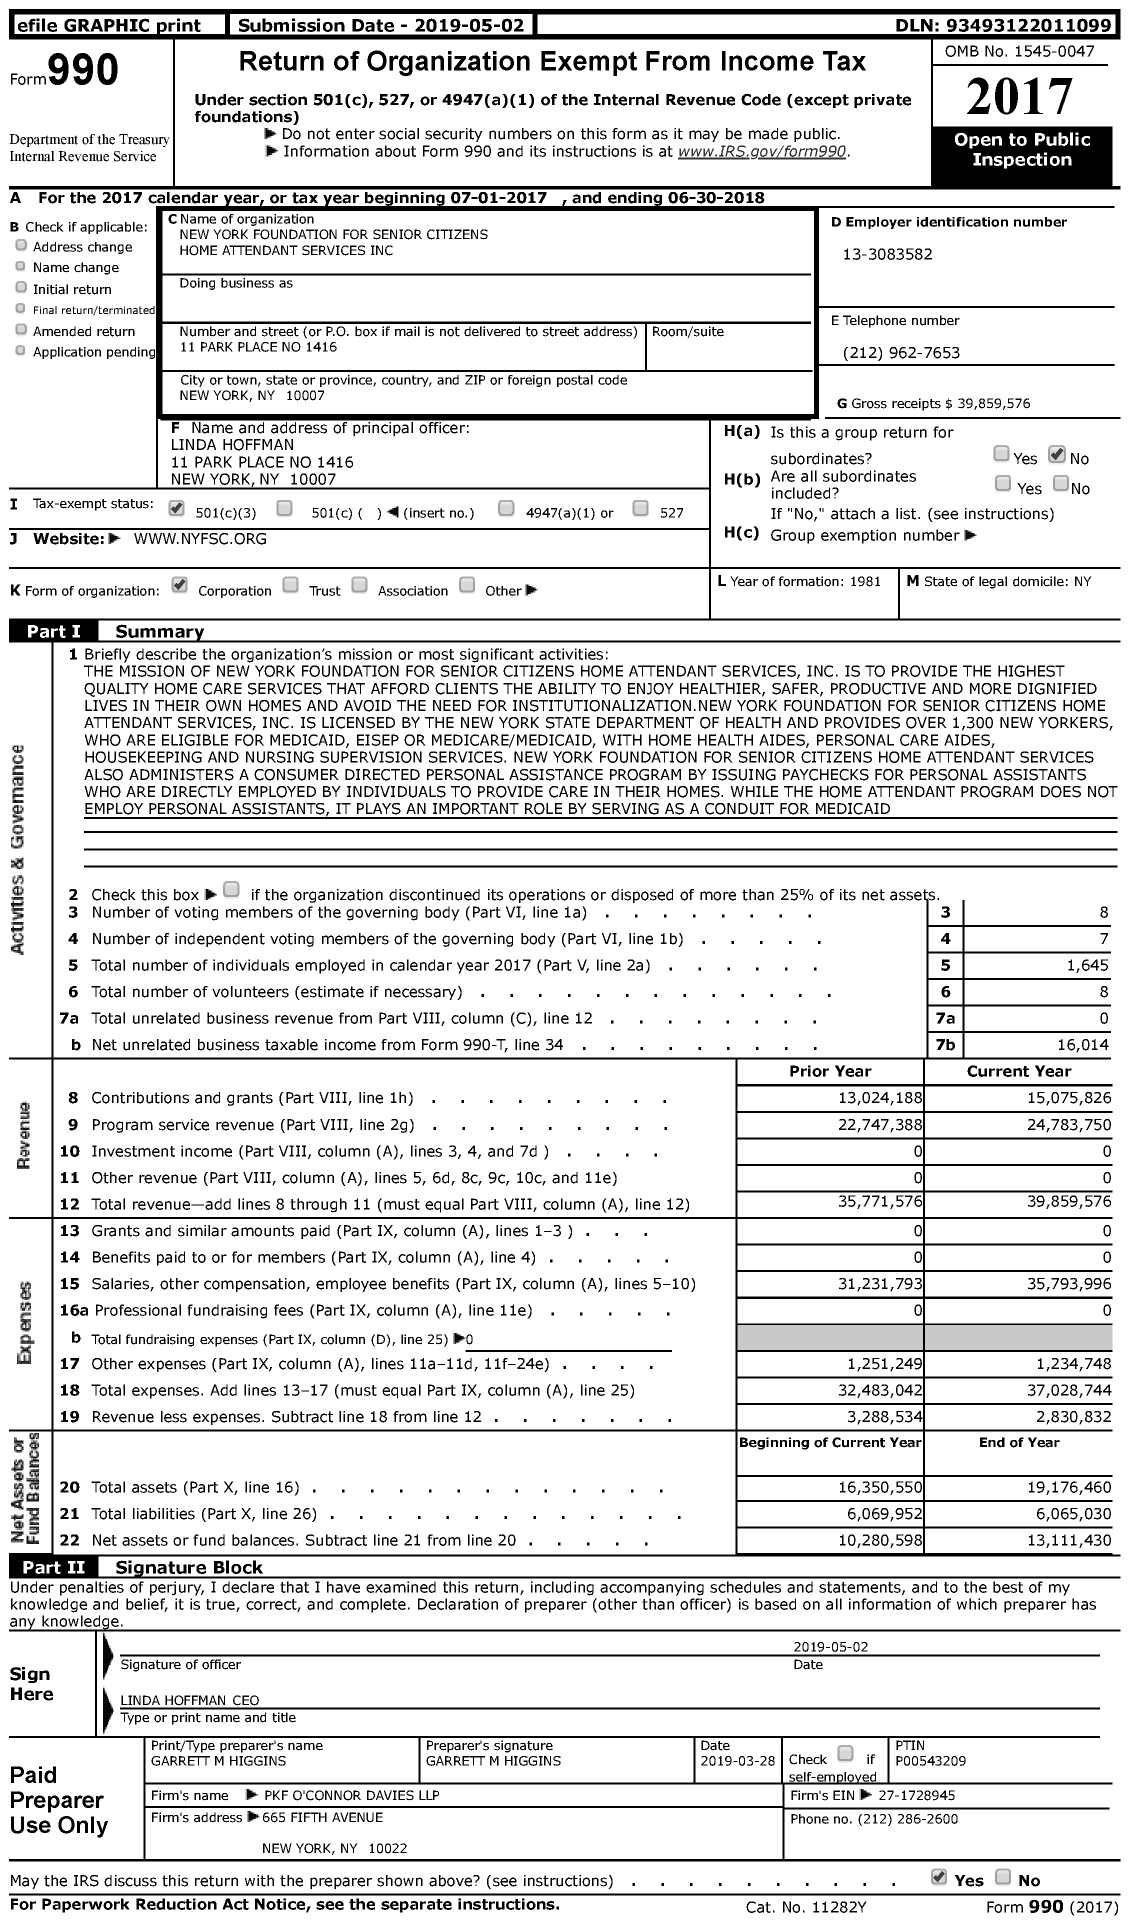 Image of first page of 2017 Form 990 for New York Foundation for Senior Citizens Home Attendant Services